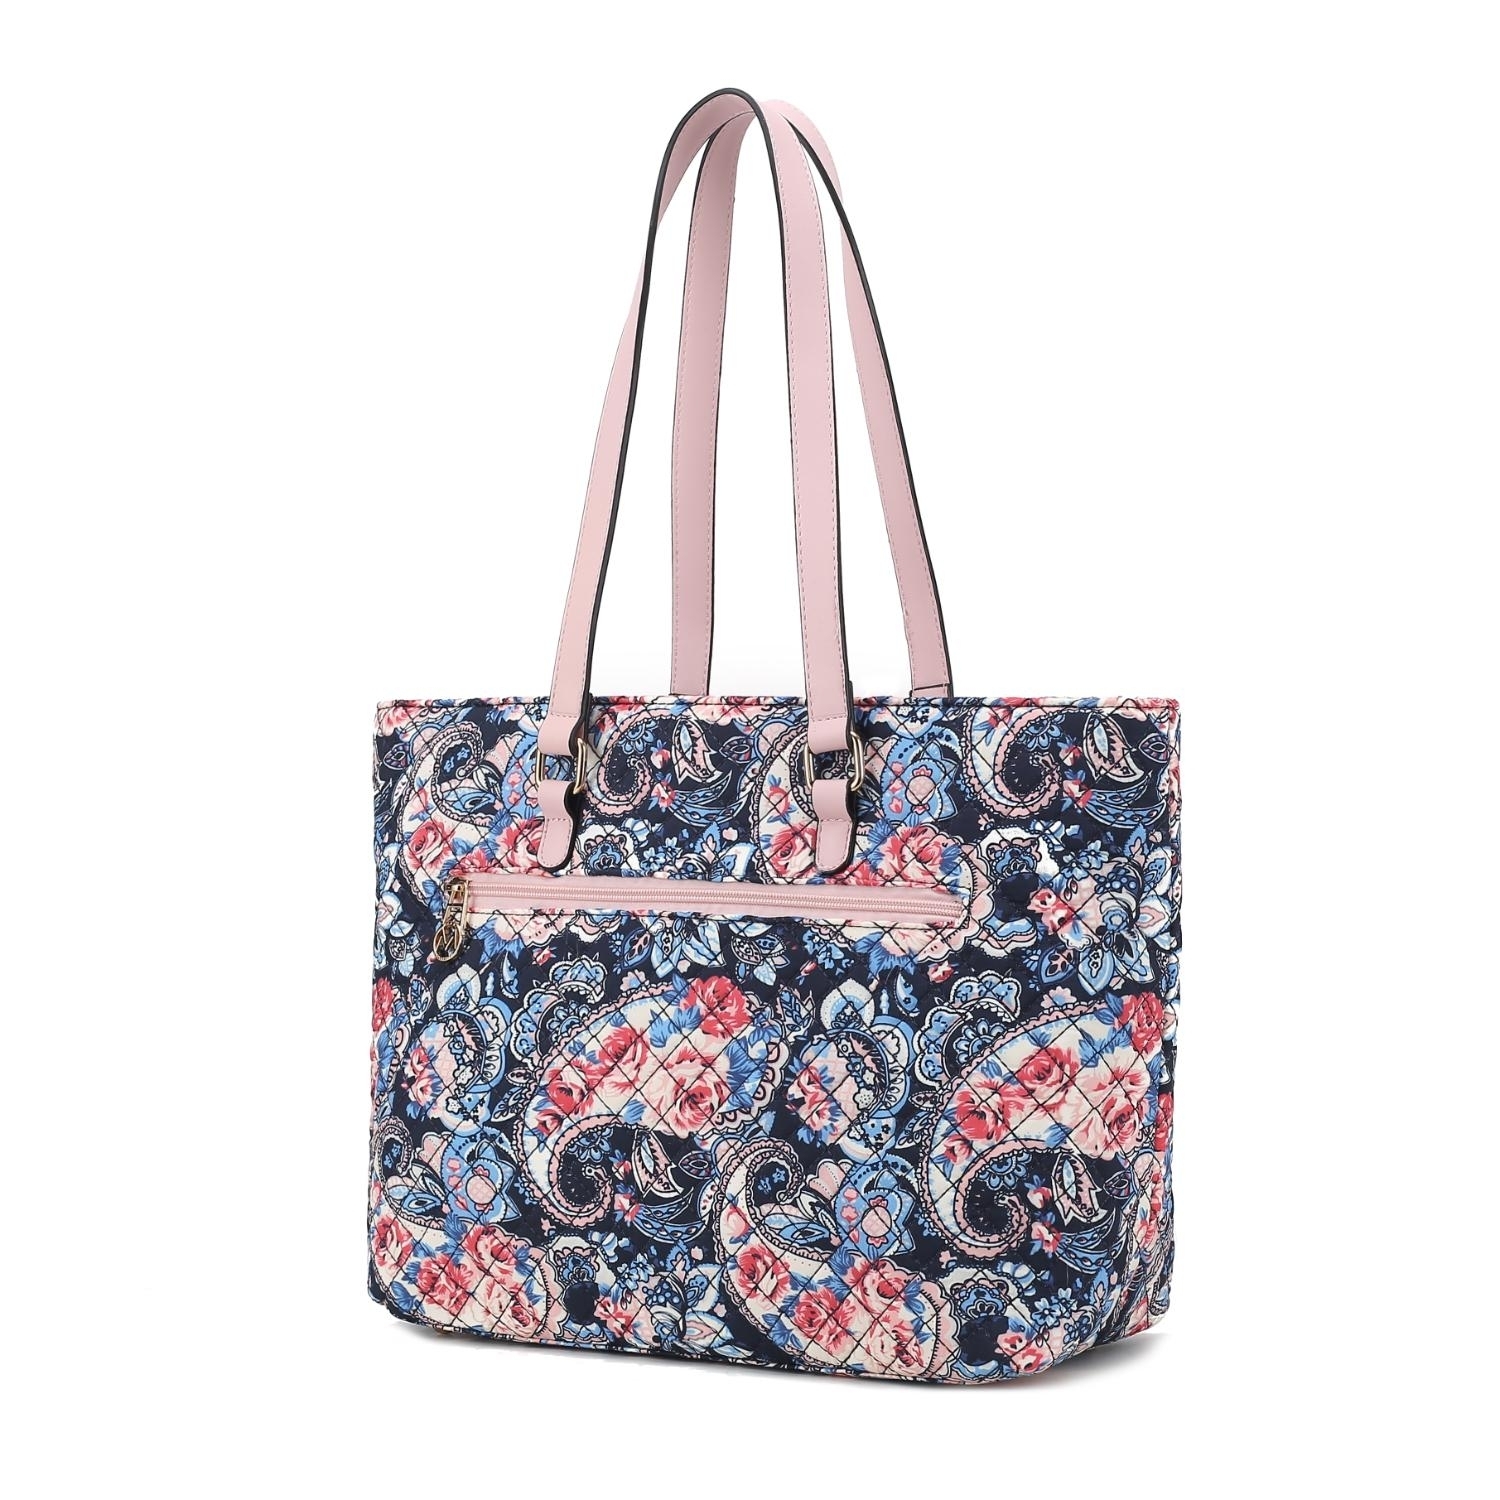 MKF Collection Hallie Quilted Cotton Botanical Pattern Women's Tote Bag By Mia K - Blue